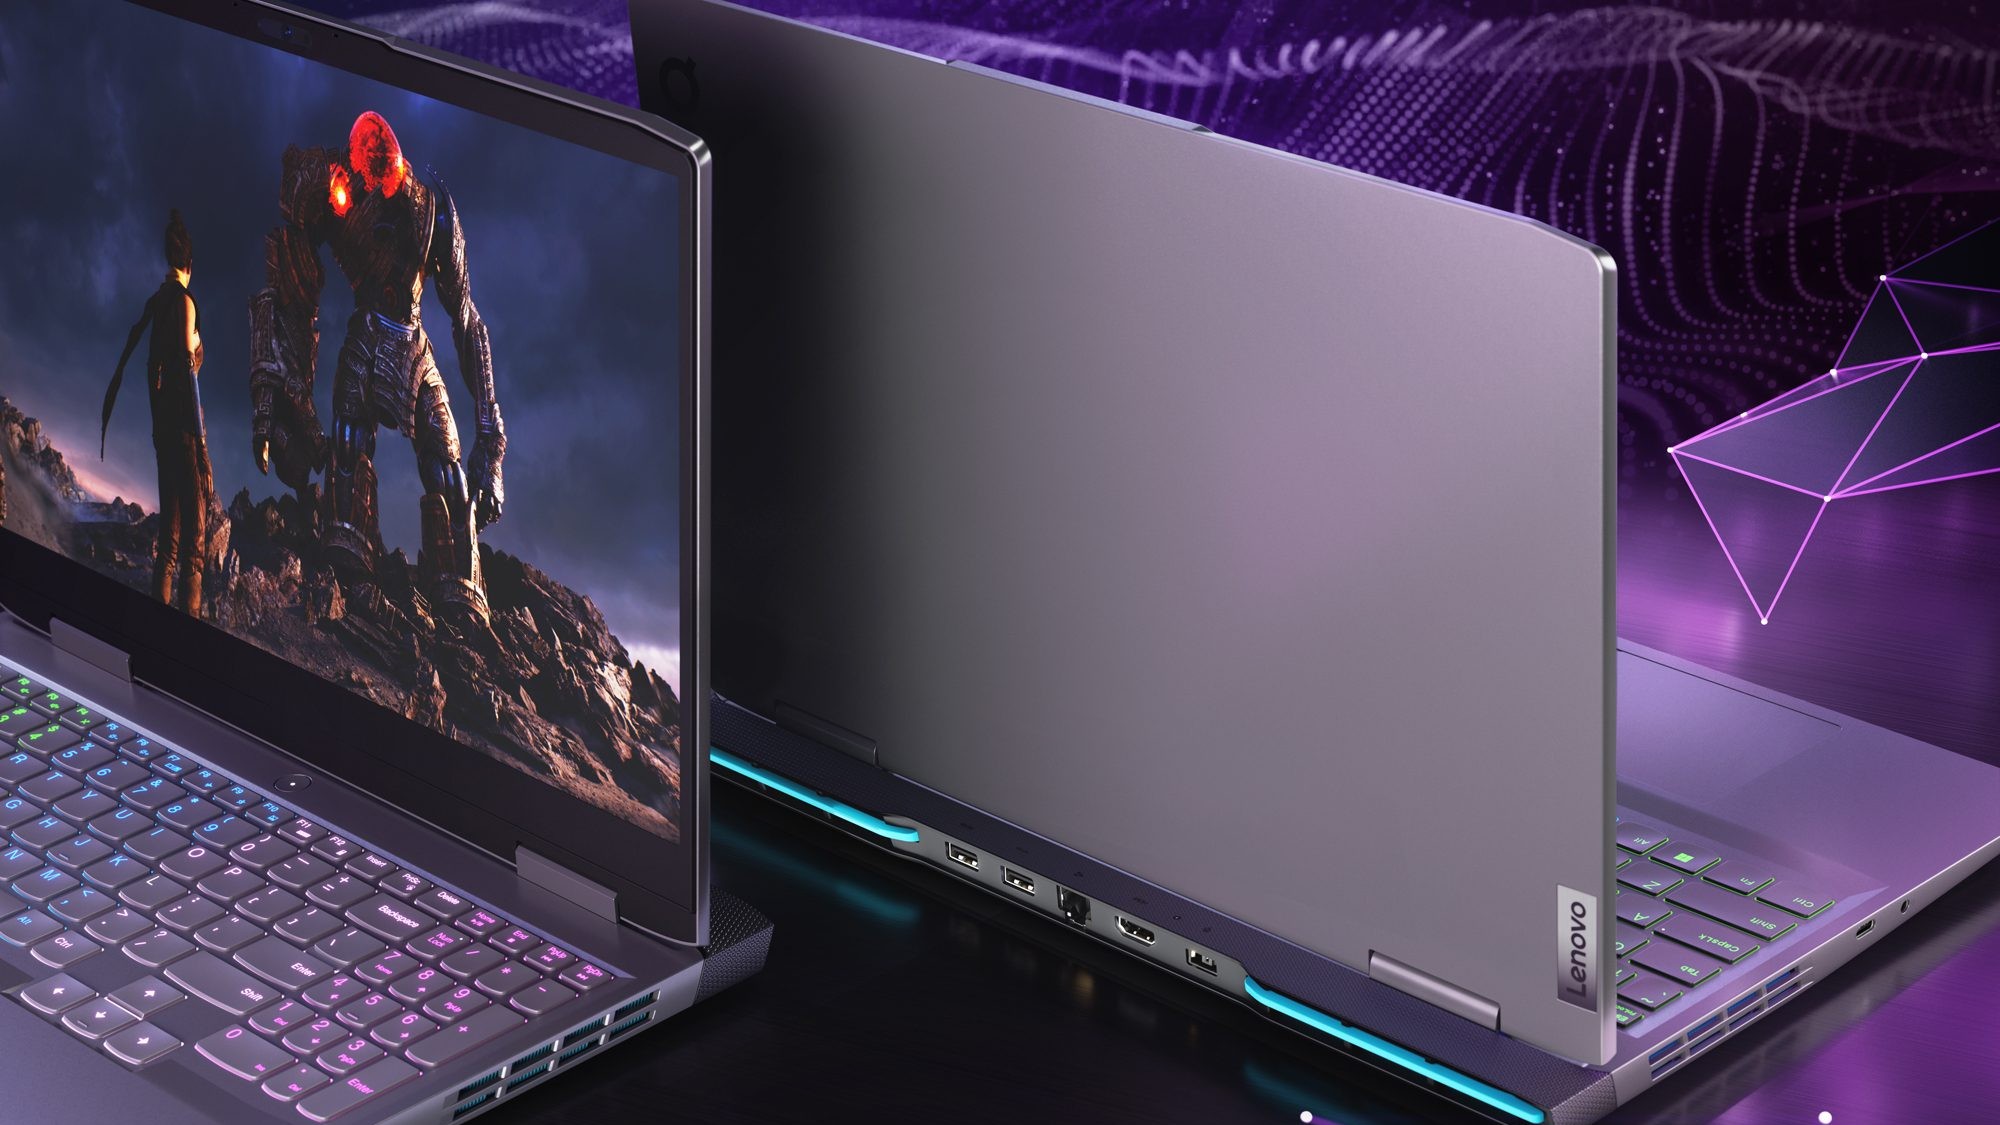 Lenovo’s new gaming laptops are ideal for gamers on a low budget